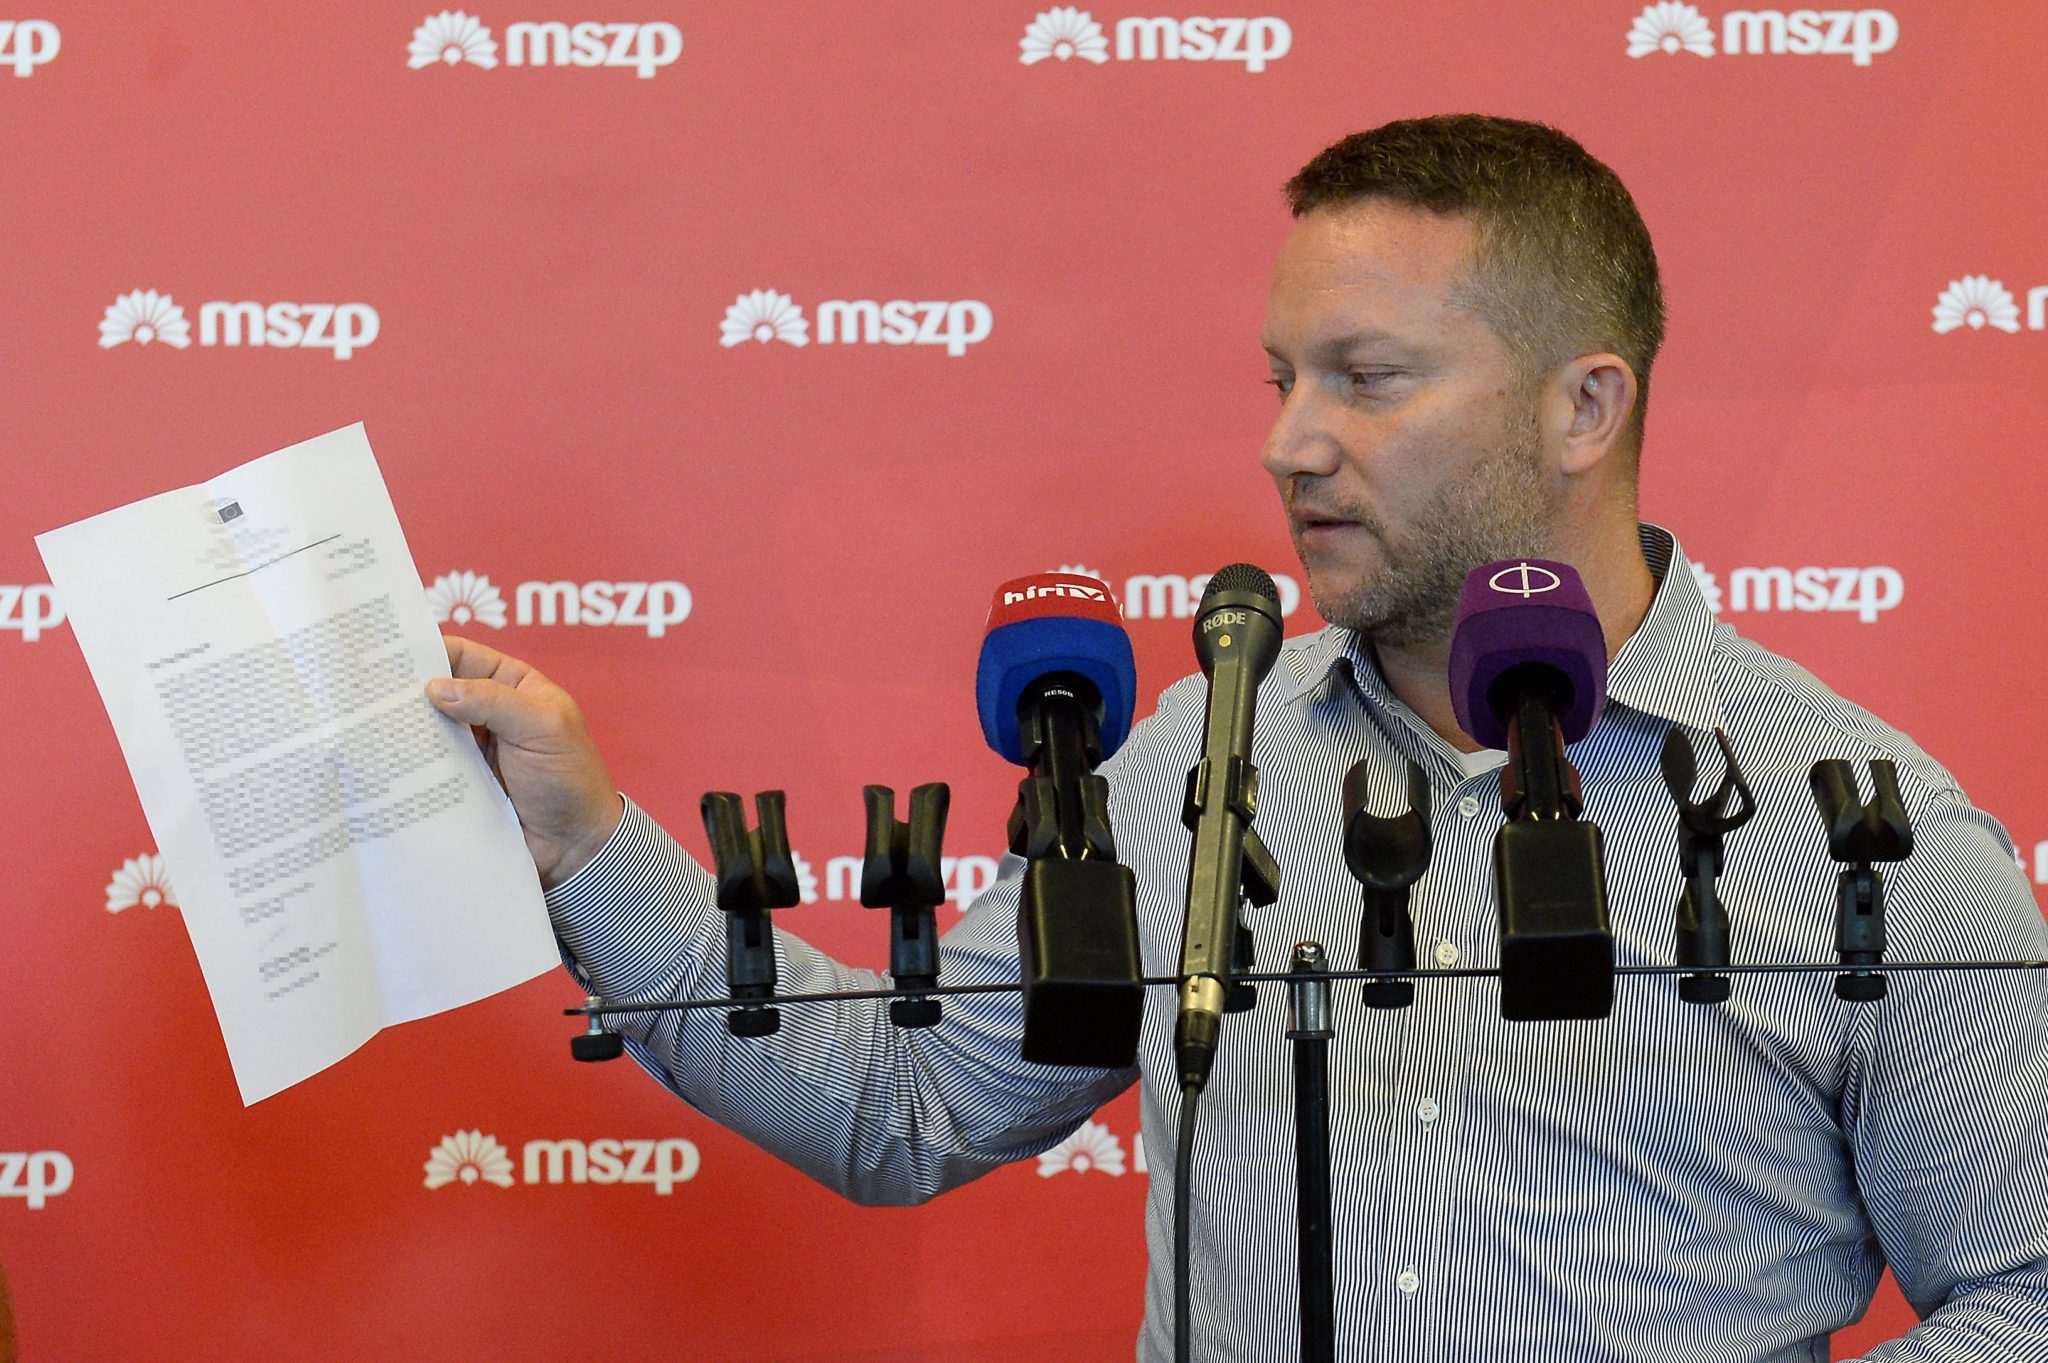 Socialist Party Calls for Review Of Hungary's Lockdown Measures